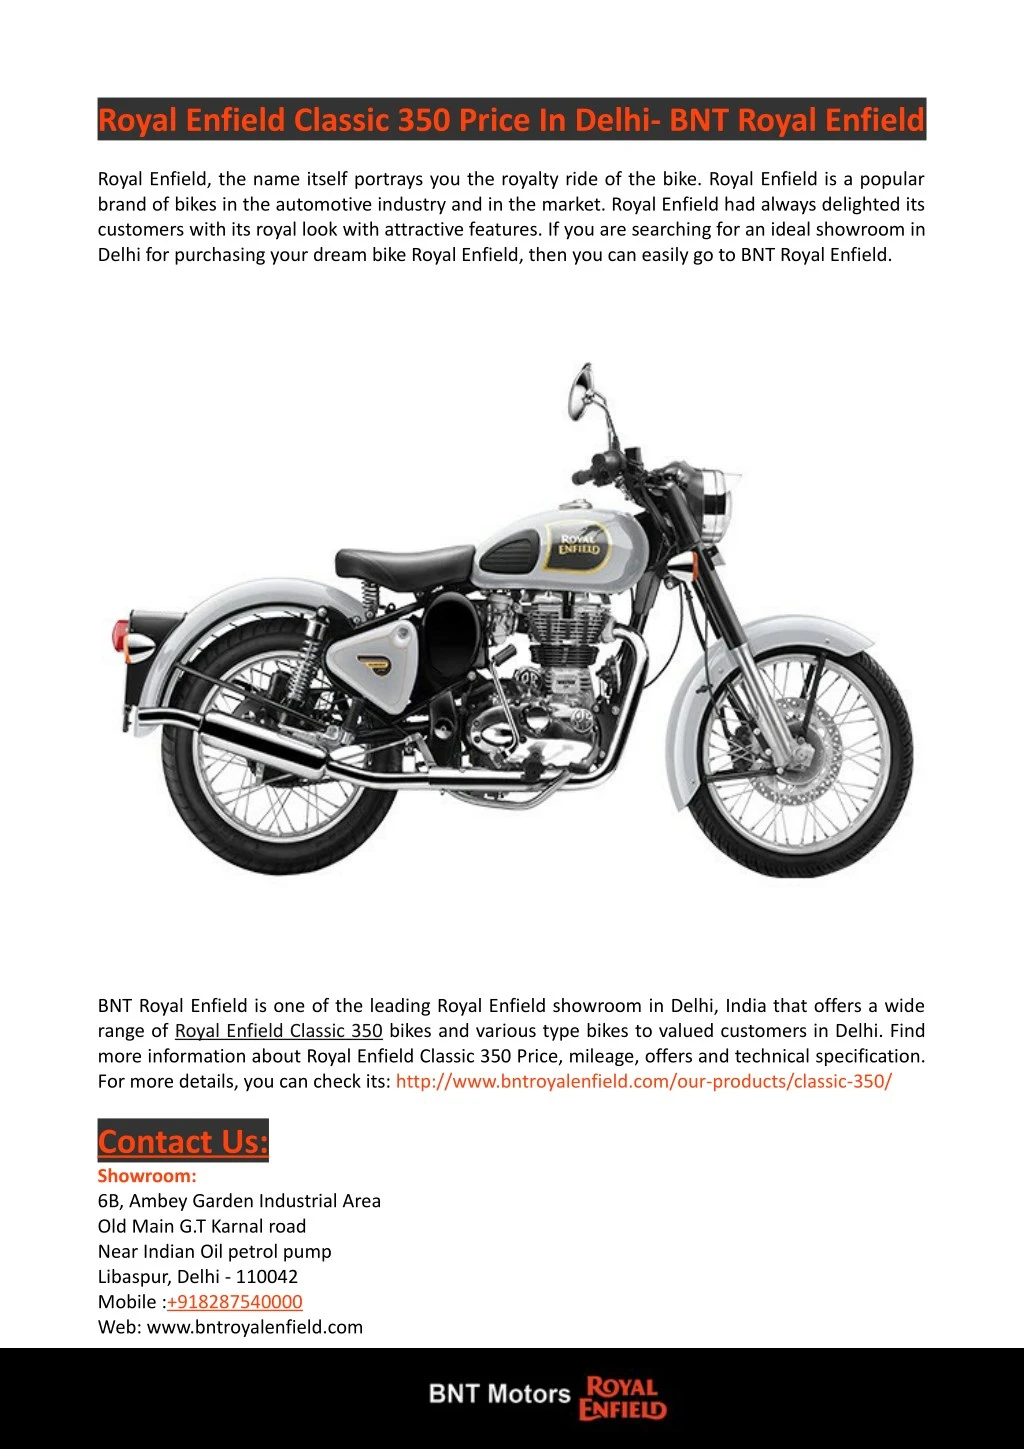 royal enfield classic 350 price in delhi